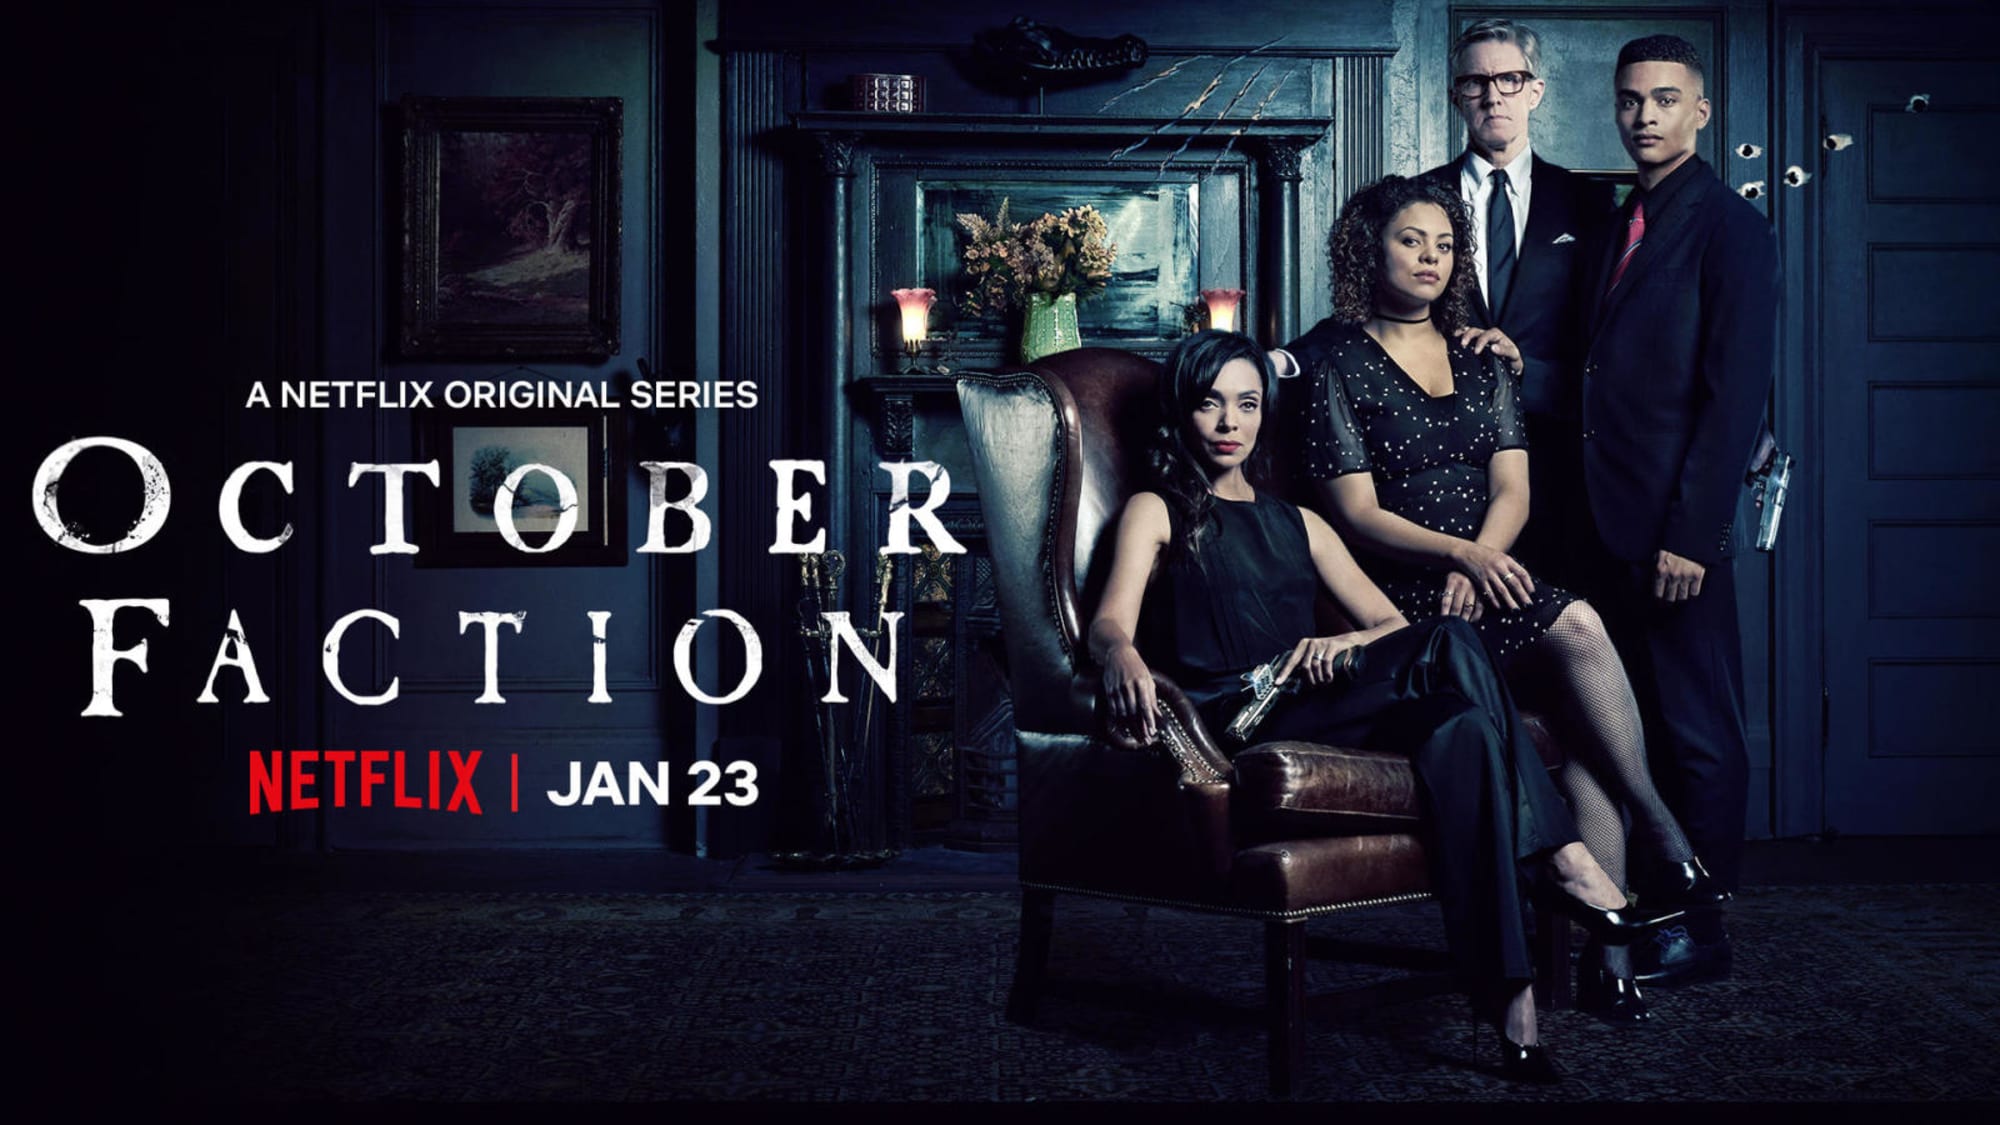 Is Netflix's October Faction worth watching this weekend?